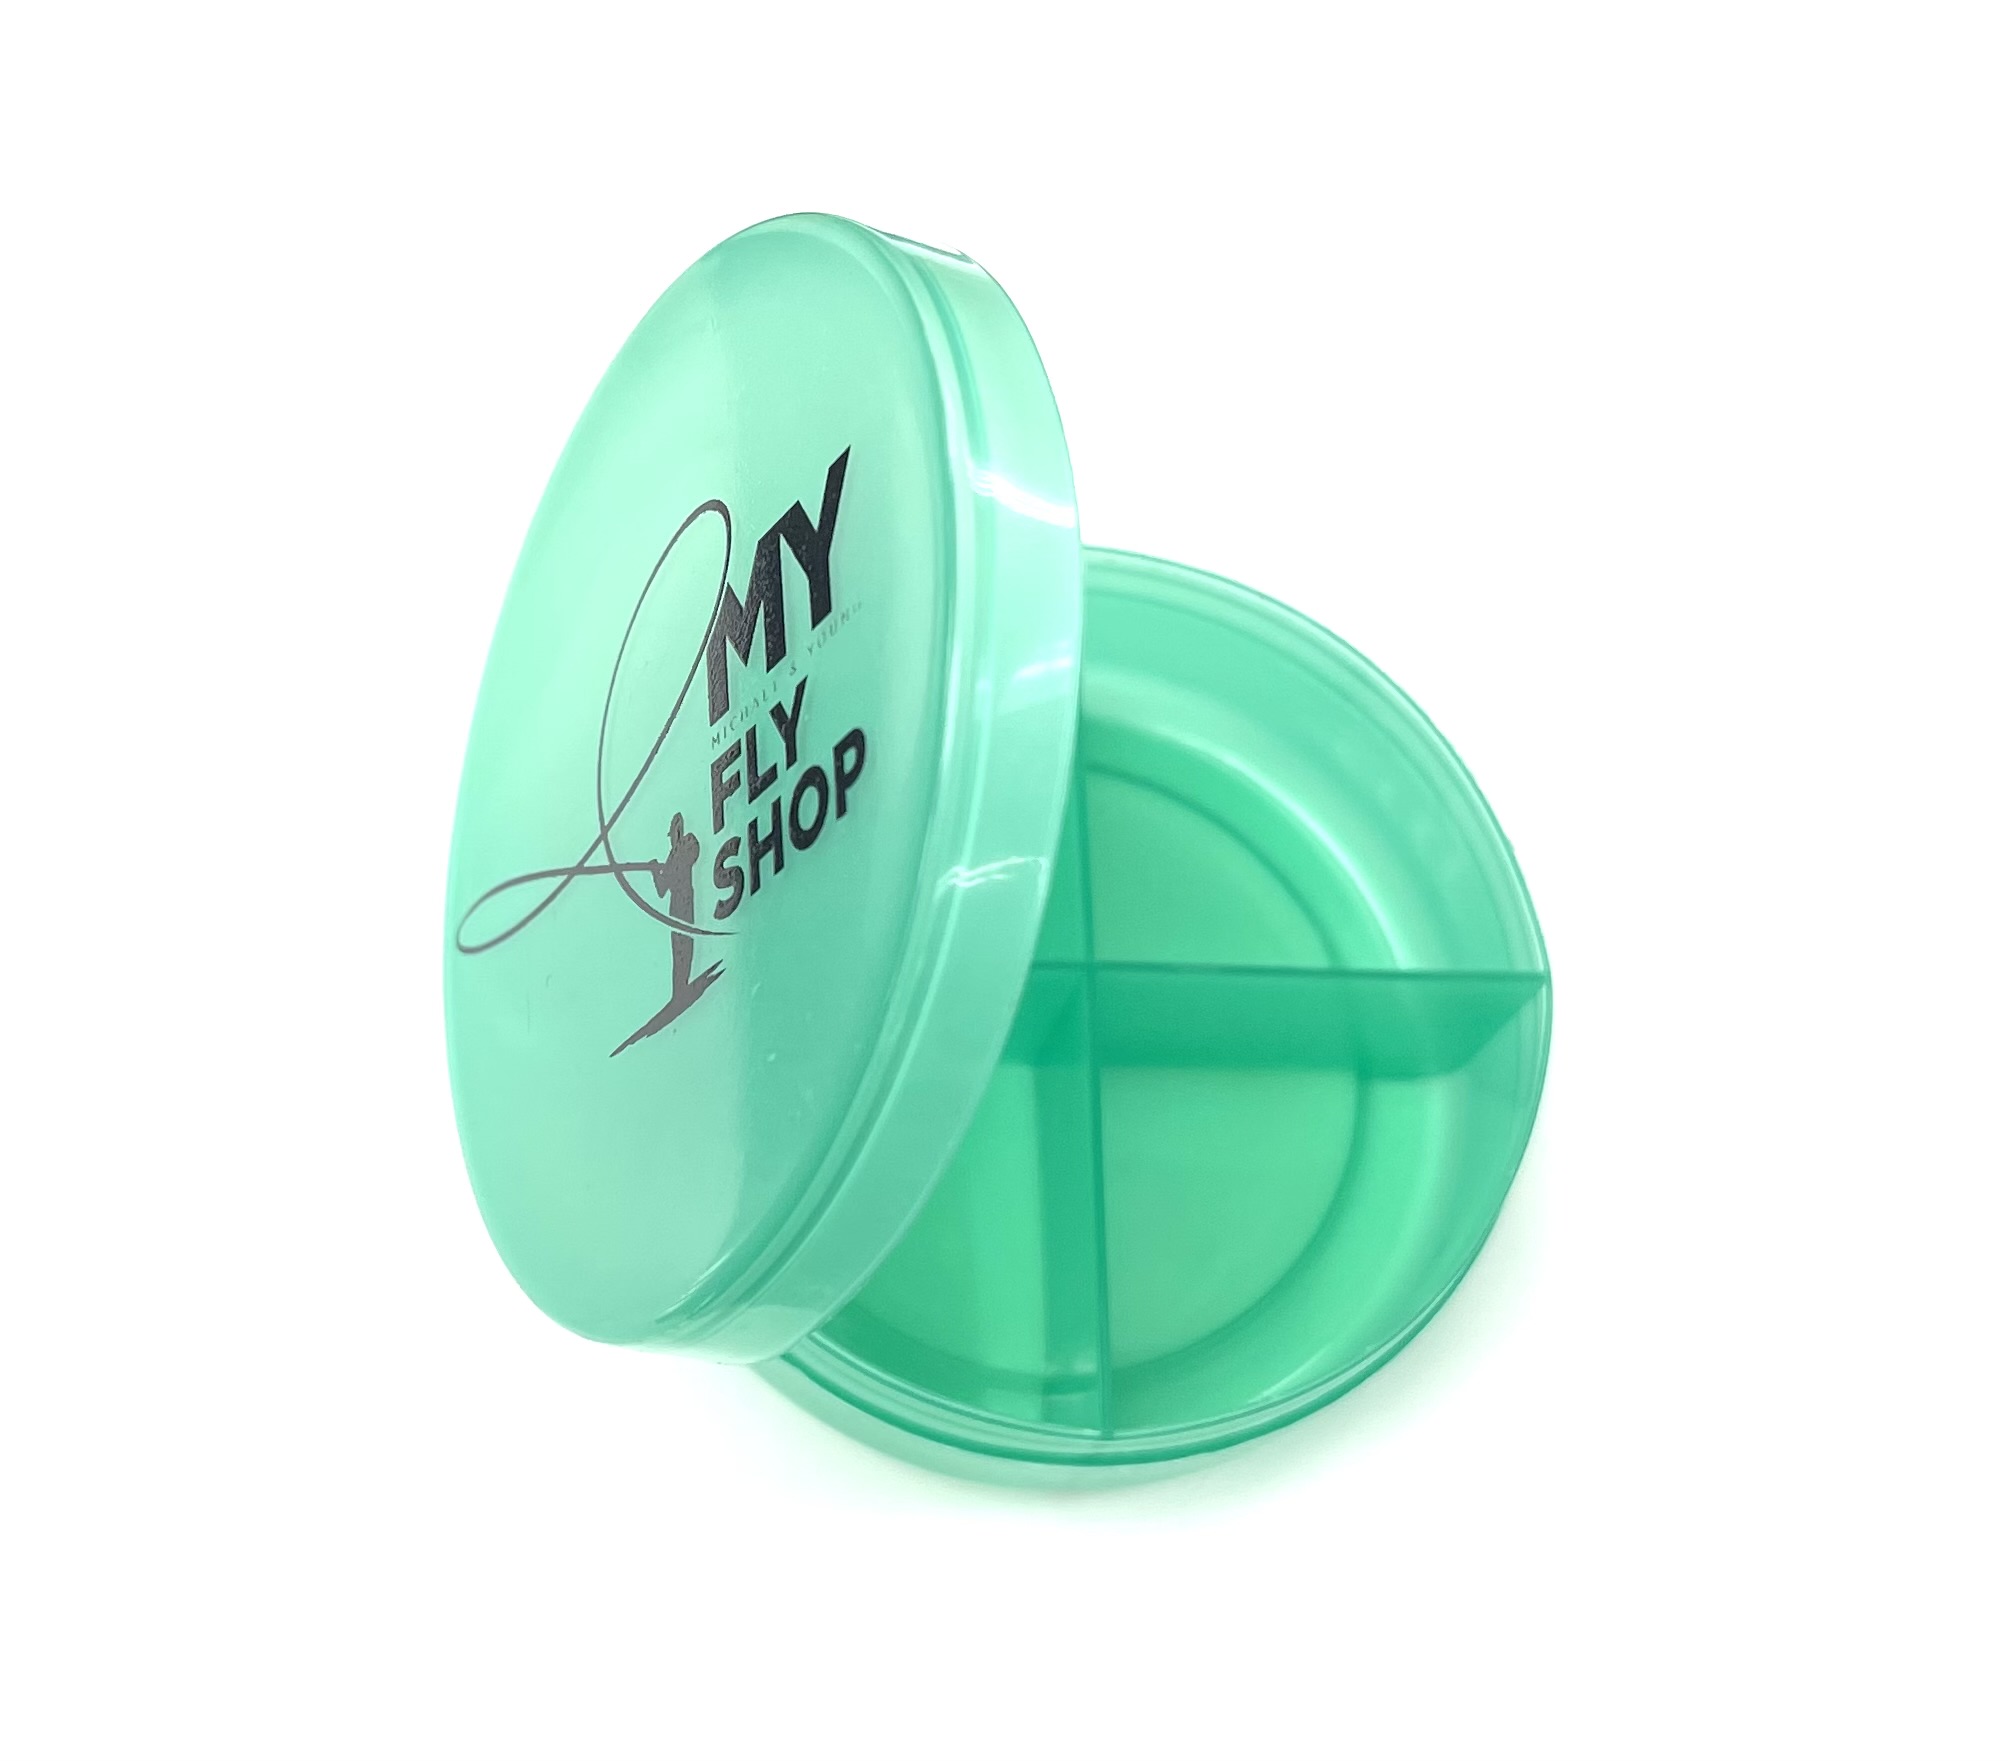 My Fly Shop Green Divided Cup